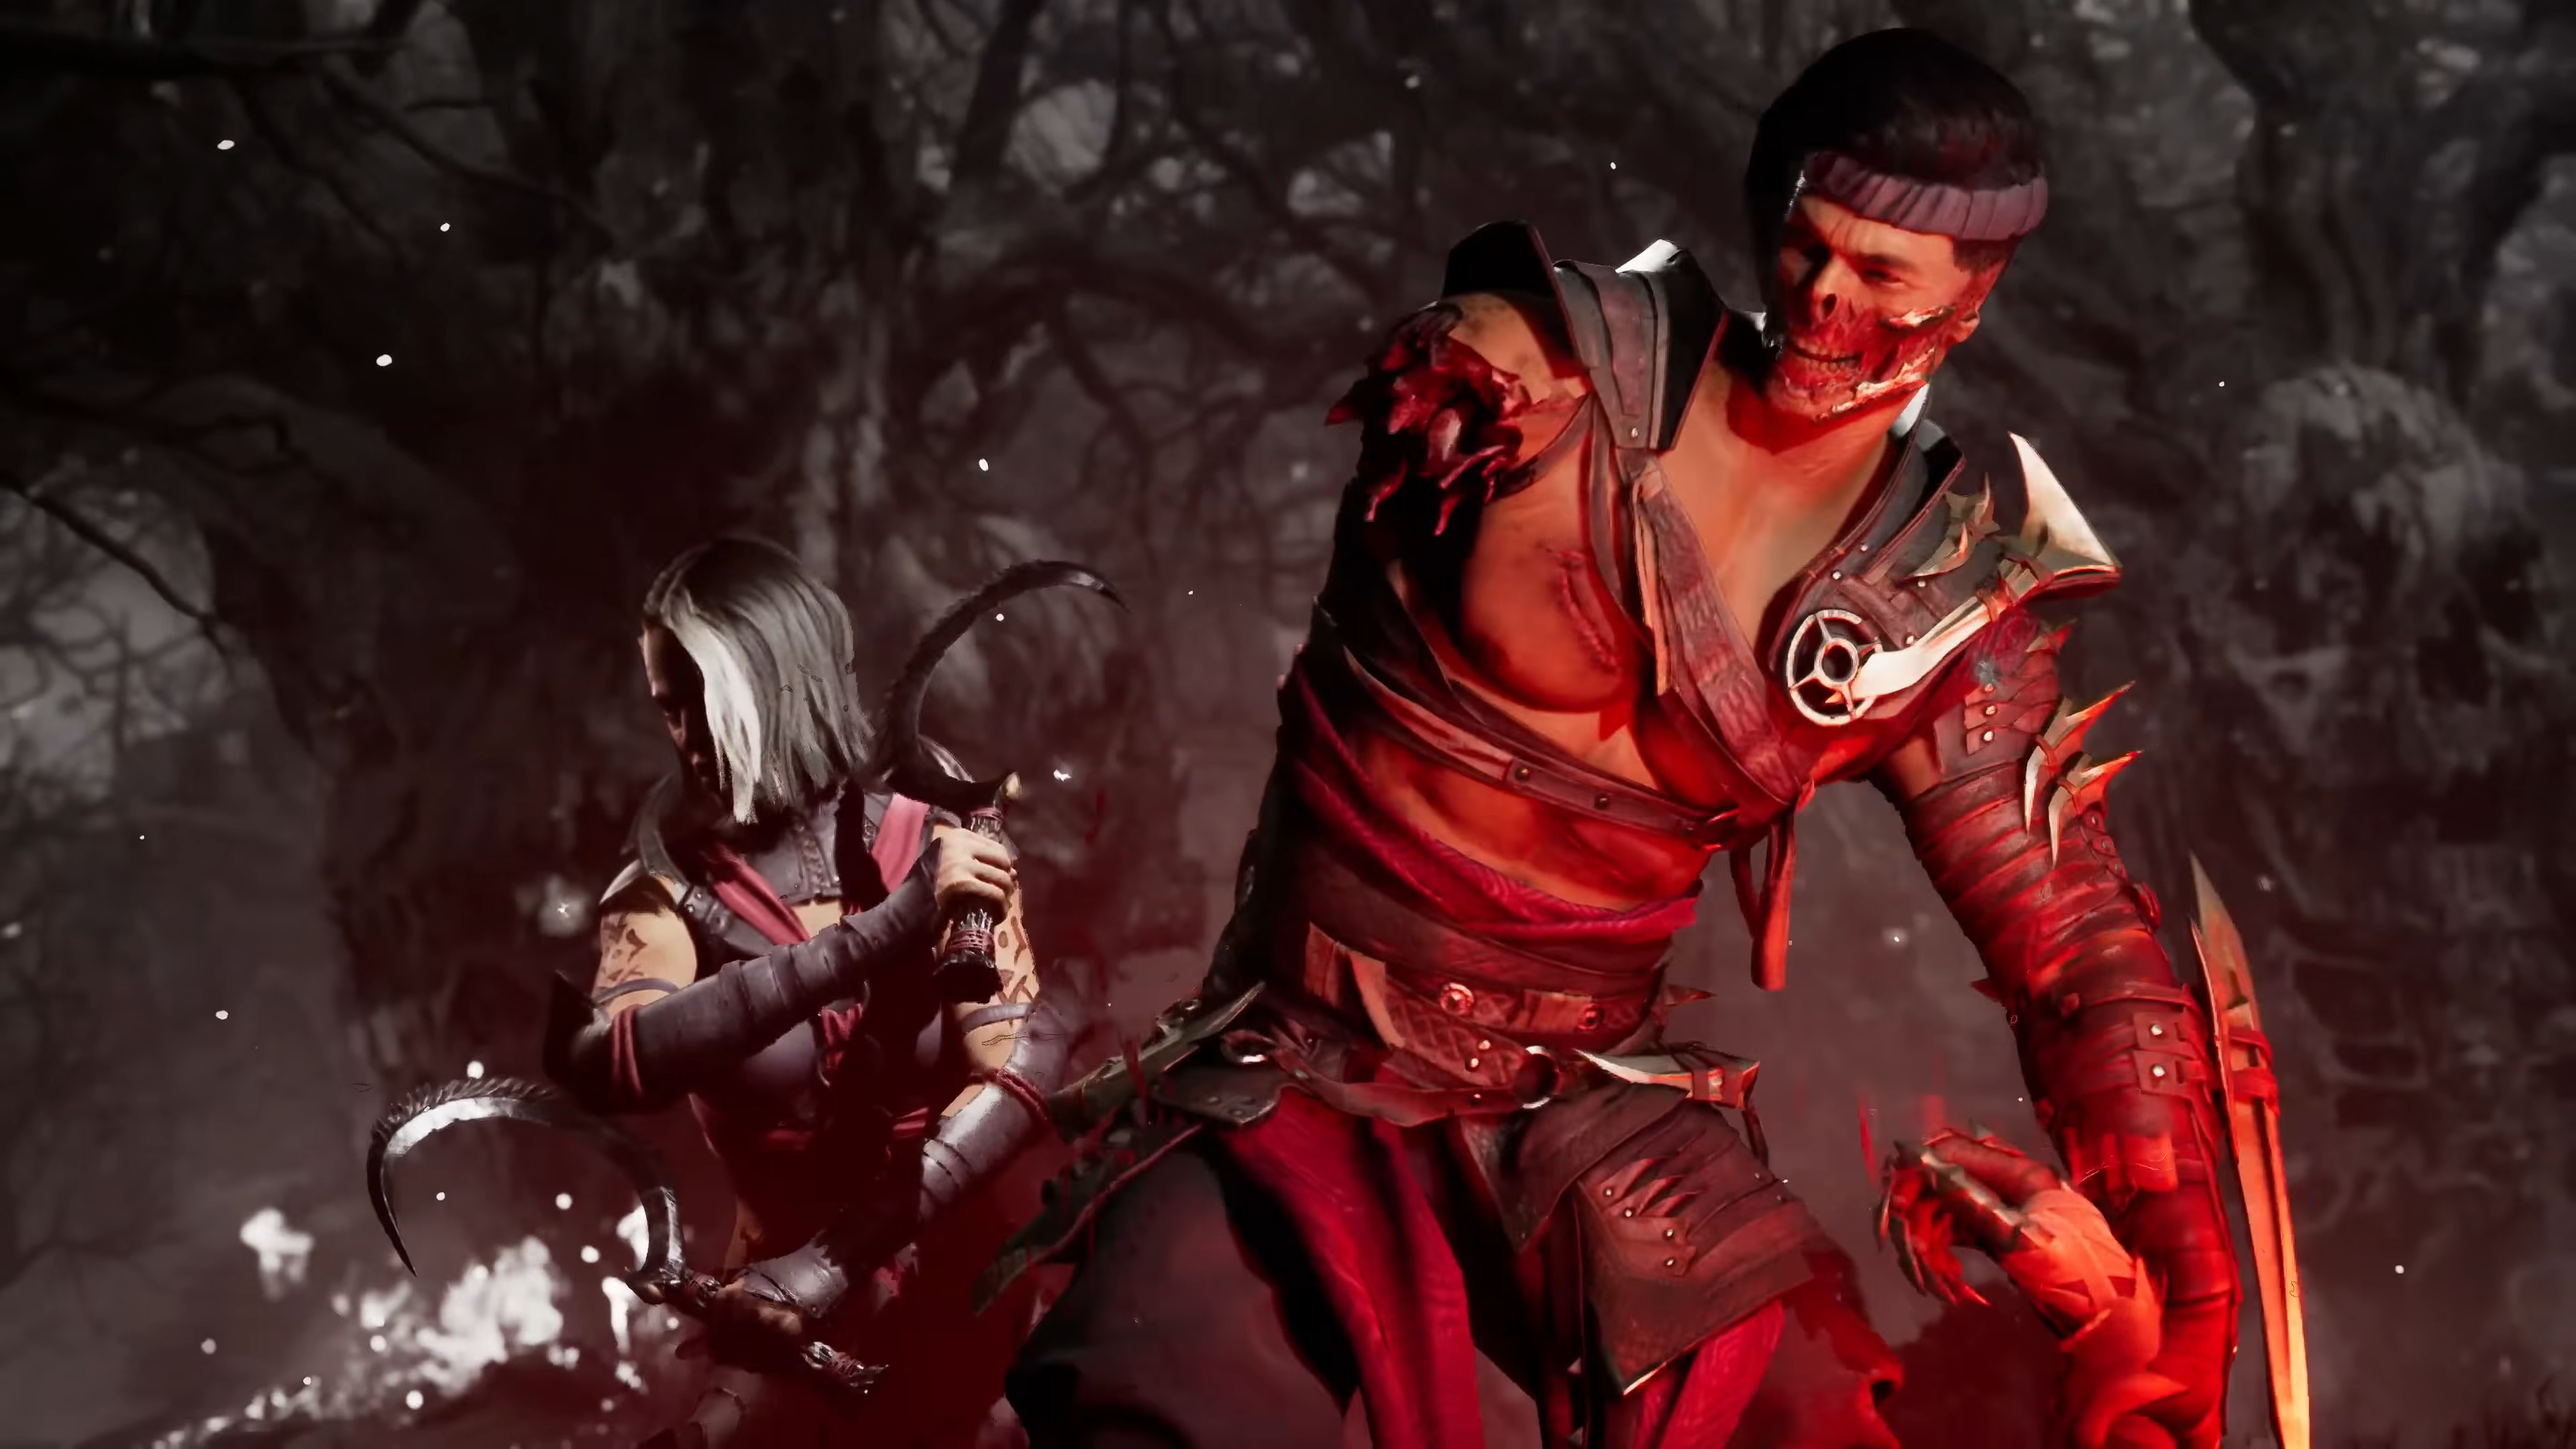 Mortal Kombat 12's official reveal is happening tomorrow